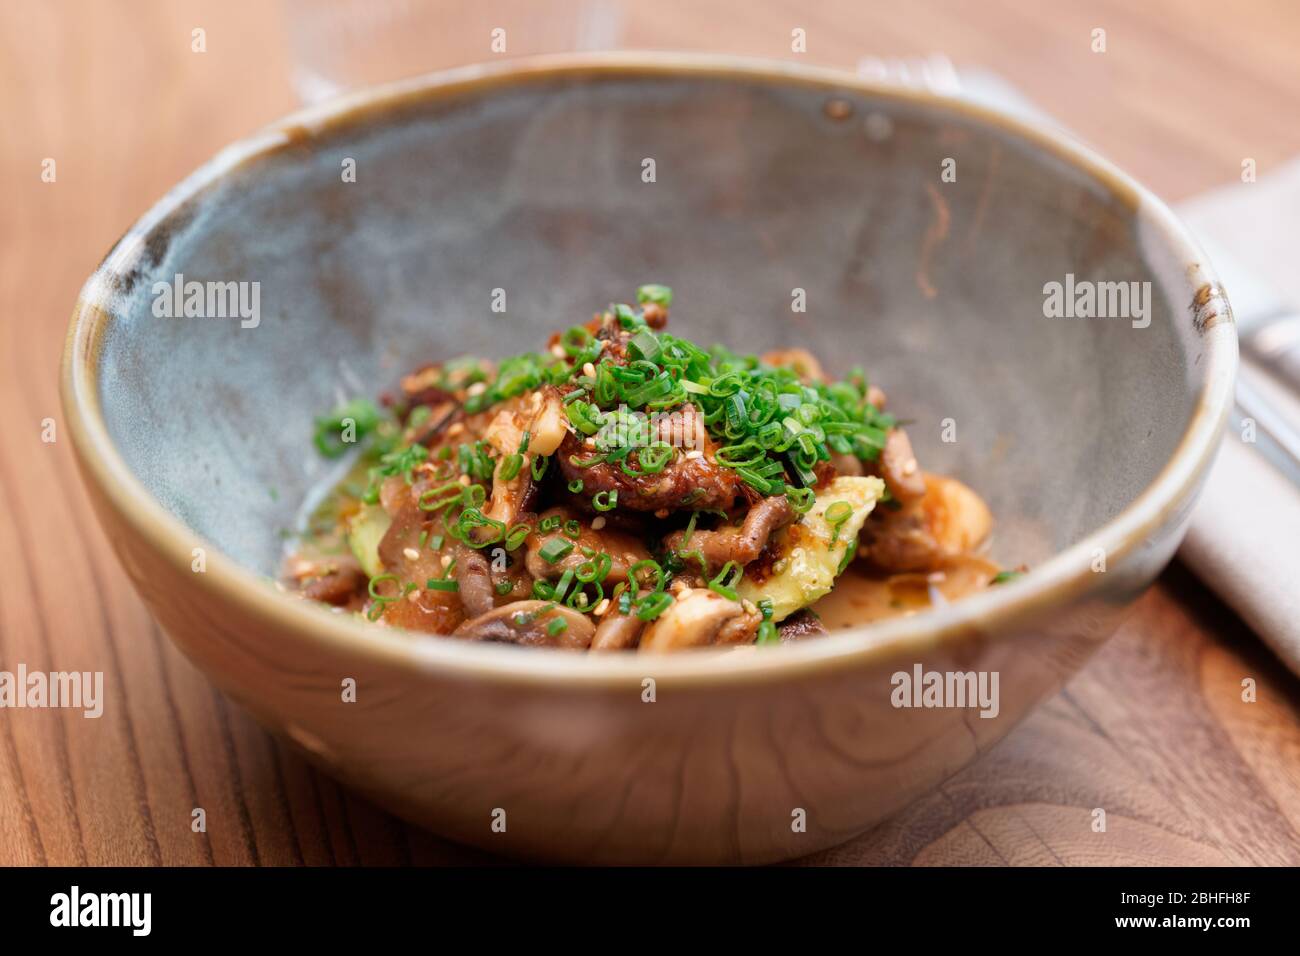 Fried mushrooms with soy sauce and scallions, Asian dish Stock Photo